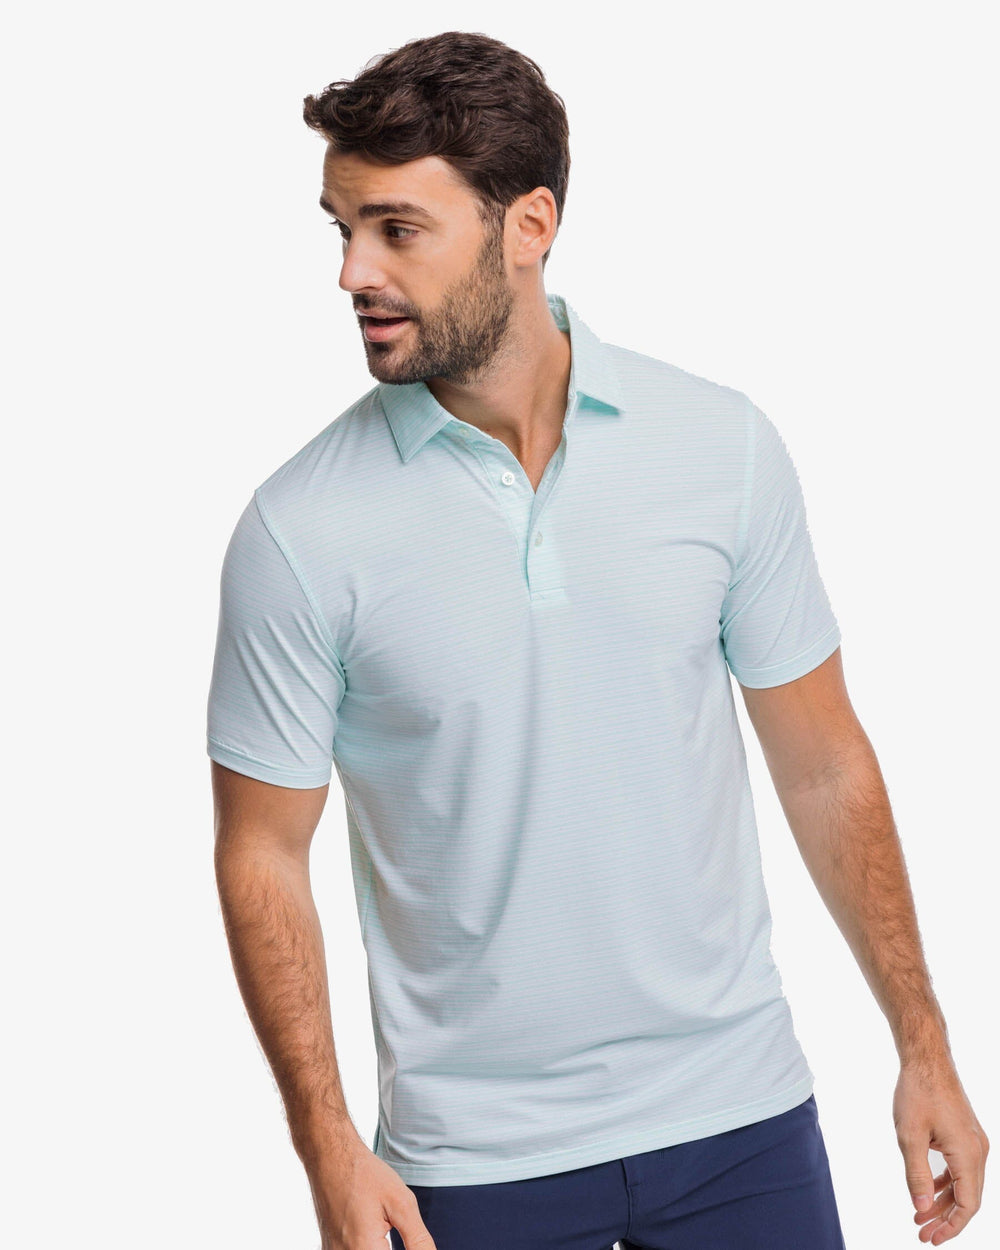 The front view of the Southern Tide brrr-eeze Millwood Stripe Performance Polo Shirt by Southern Tide - Baltic Teal